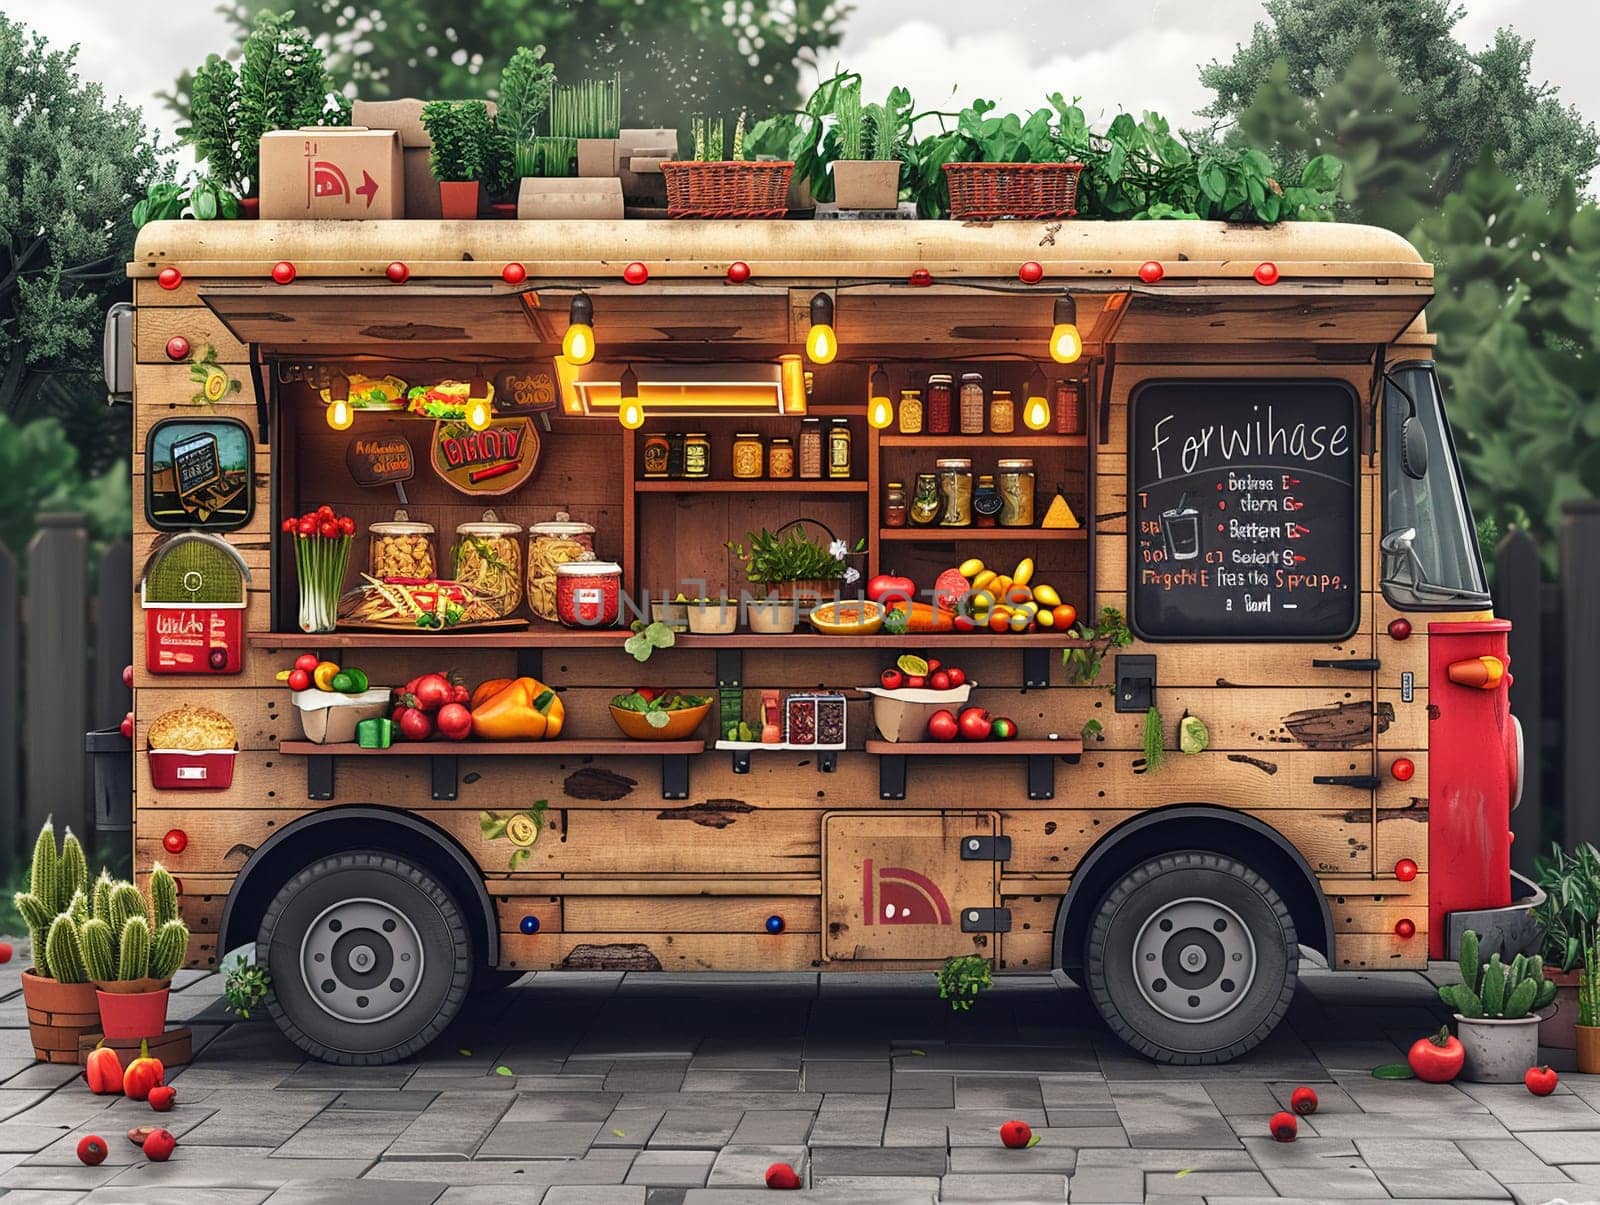 Food truck festival in cartoon style, designed with cute stock illustrations of diverse culinary offerings.